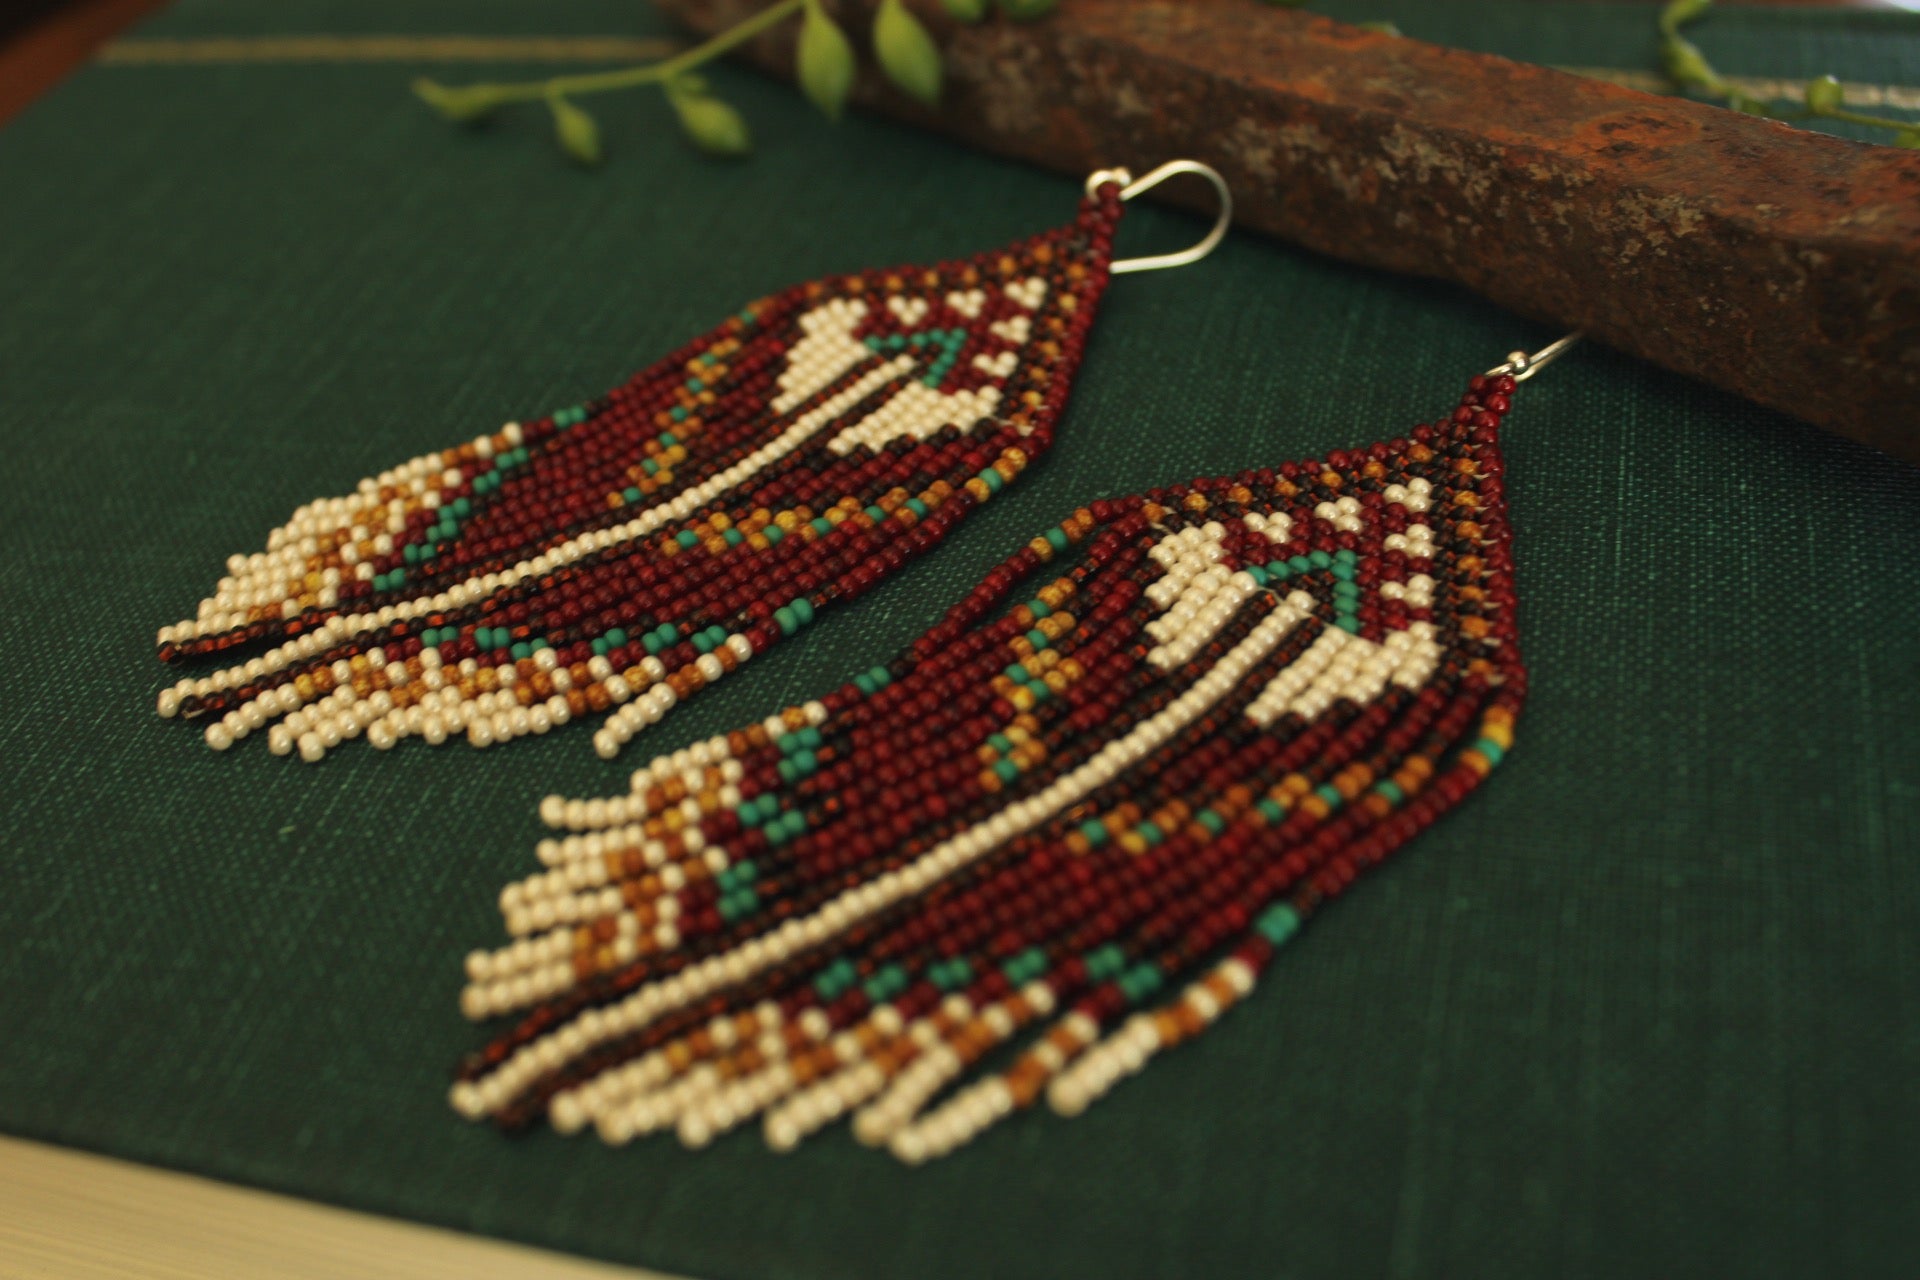 Red Beaded Fringe Earrings – Forged by Wilson